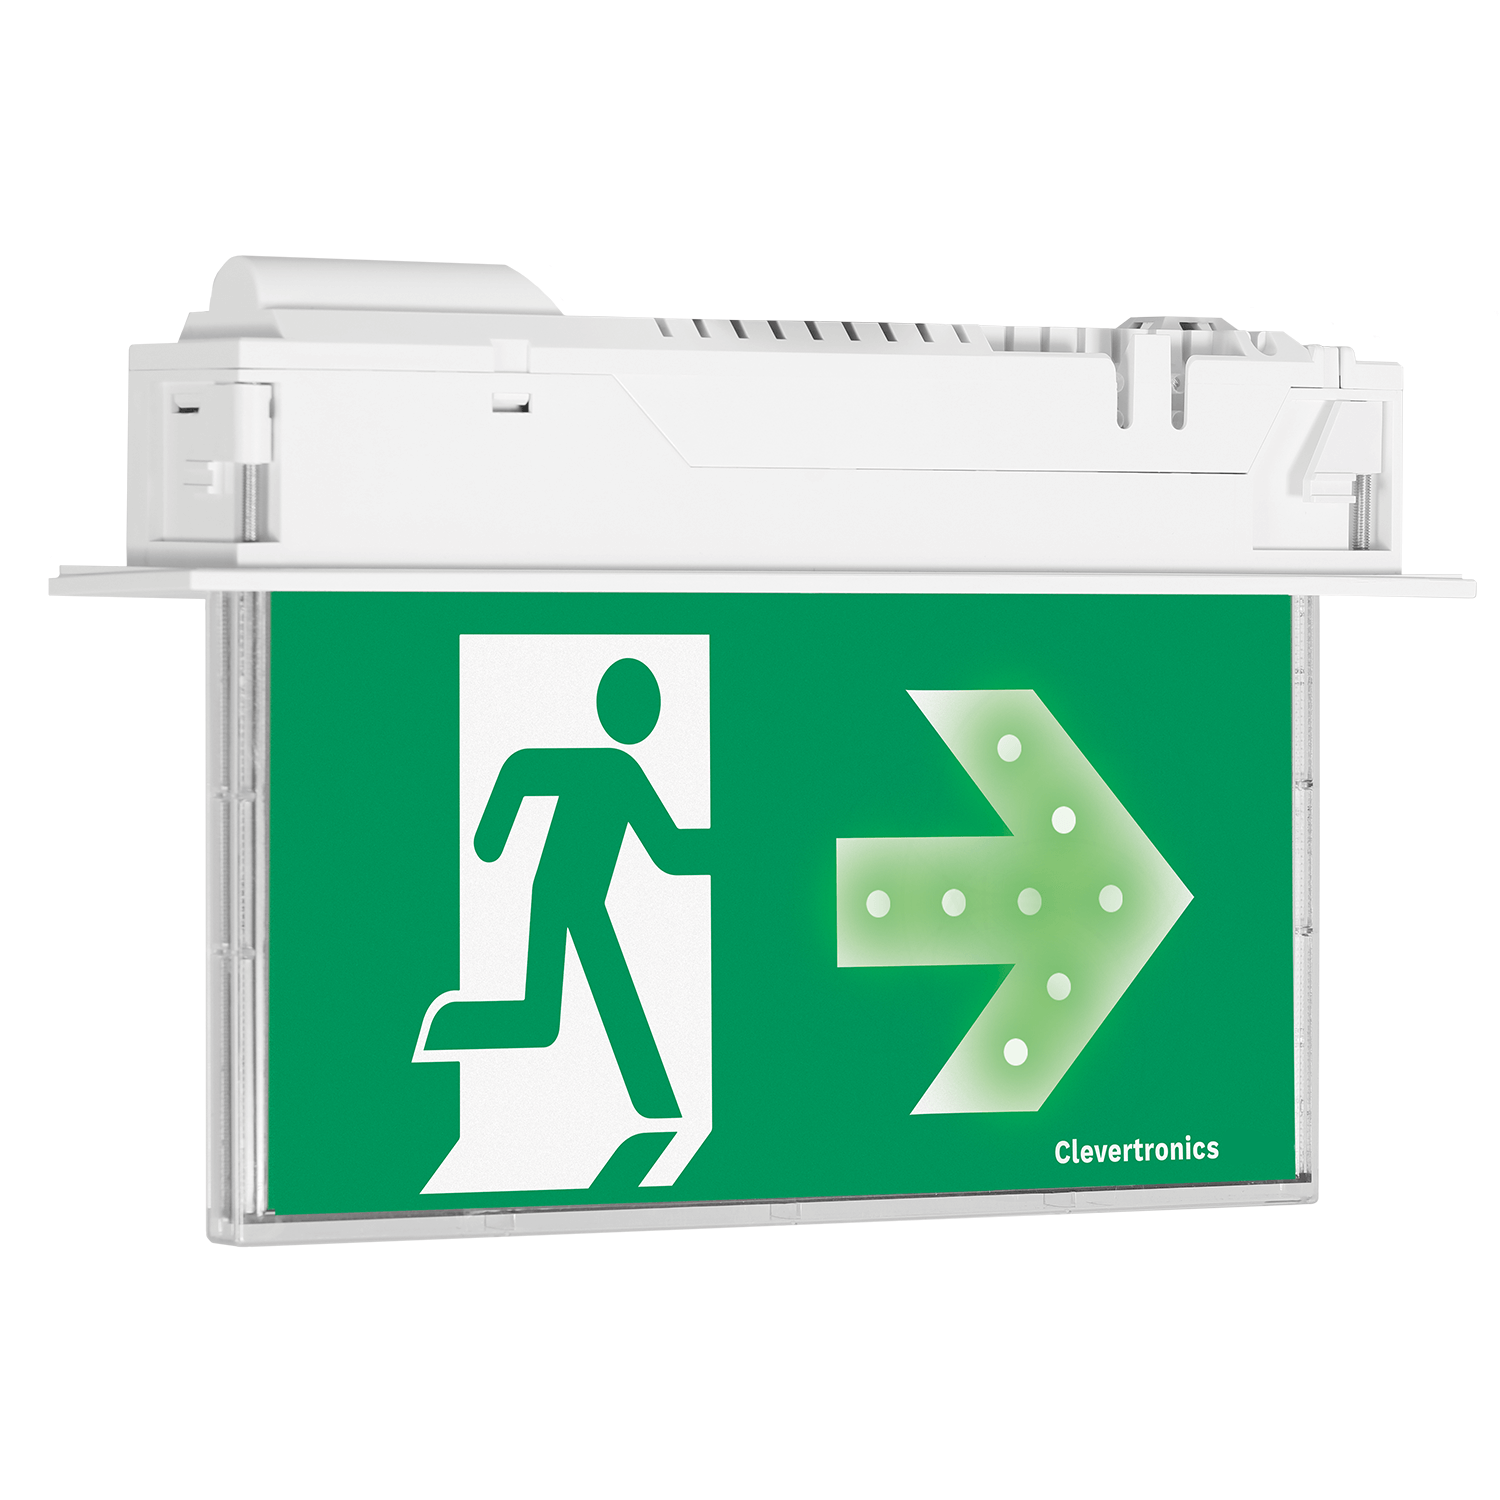 CleverEVAC Dynamic Green Recessed Exit